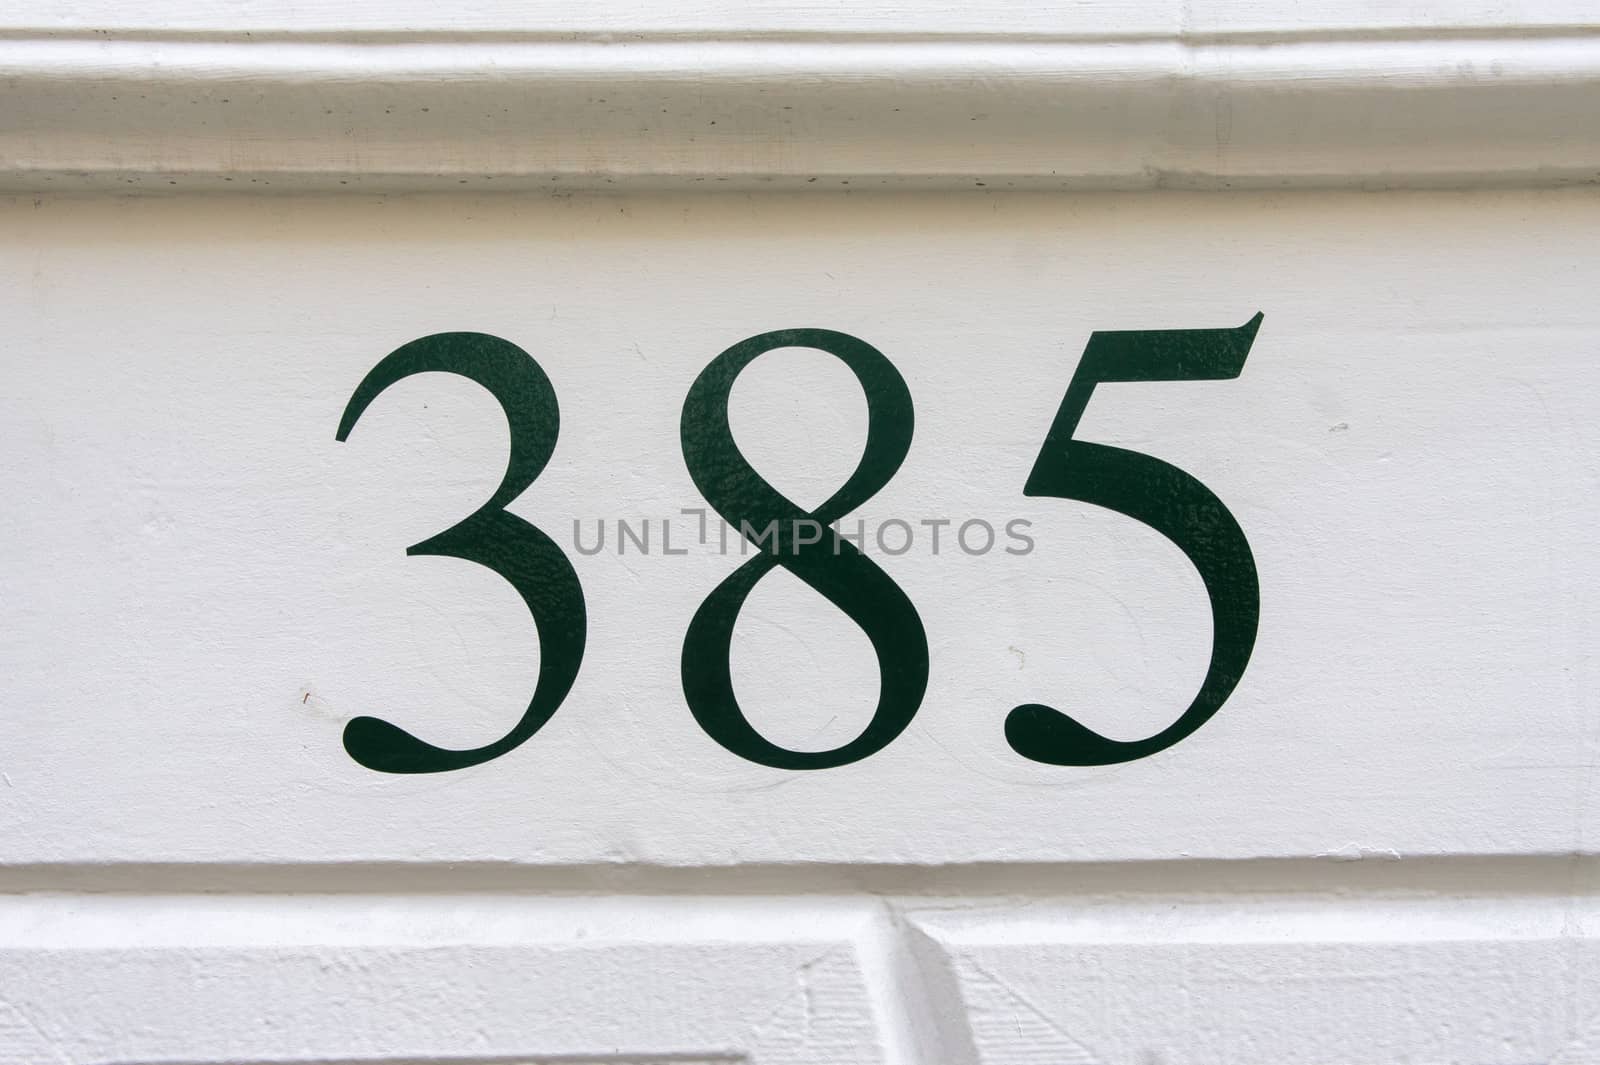 House number thee hundred and eighty five (385)